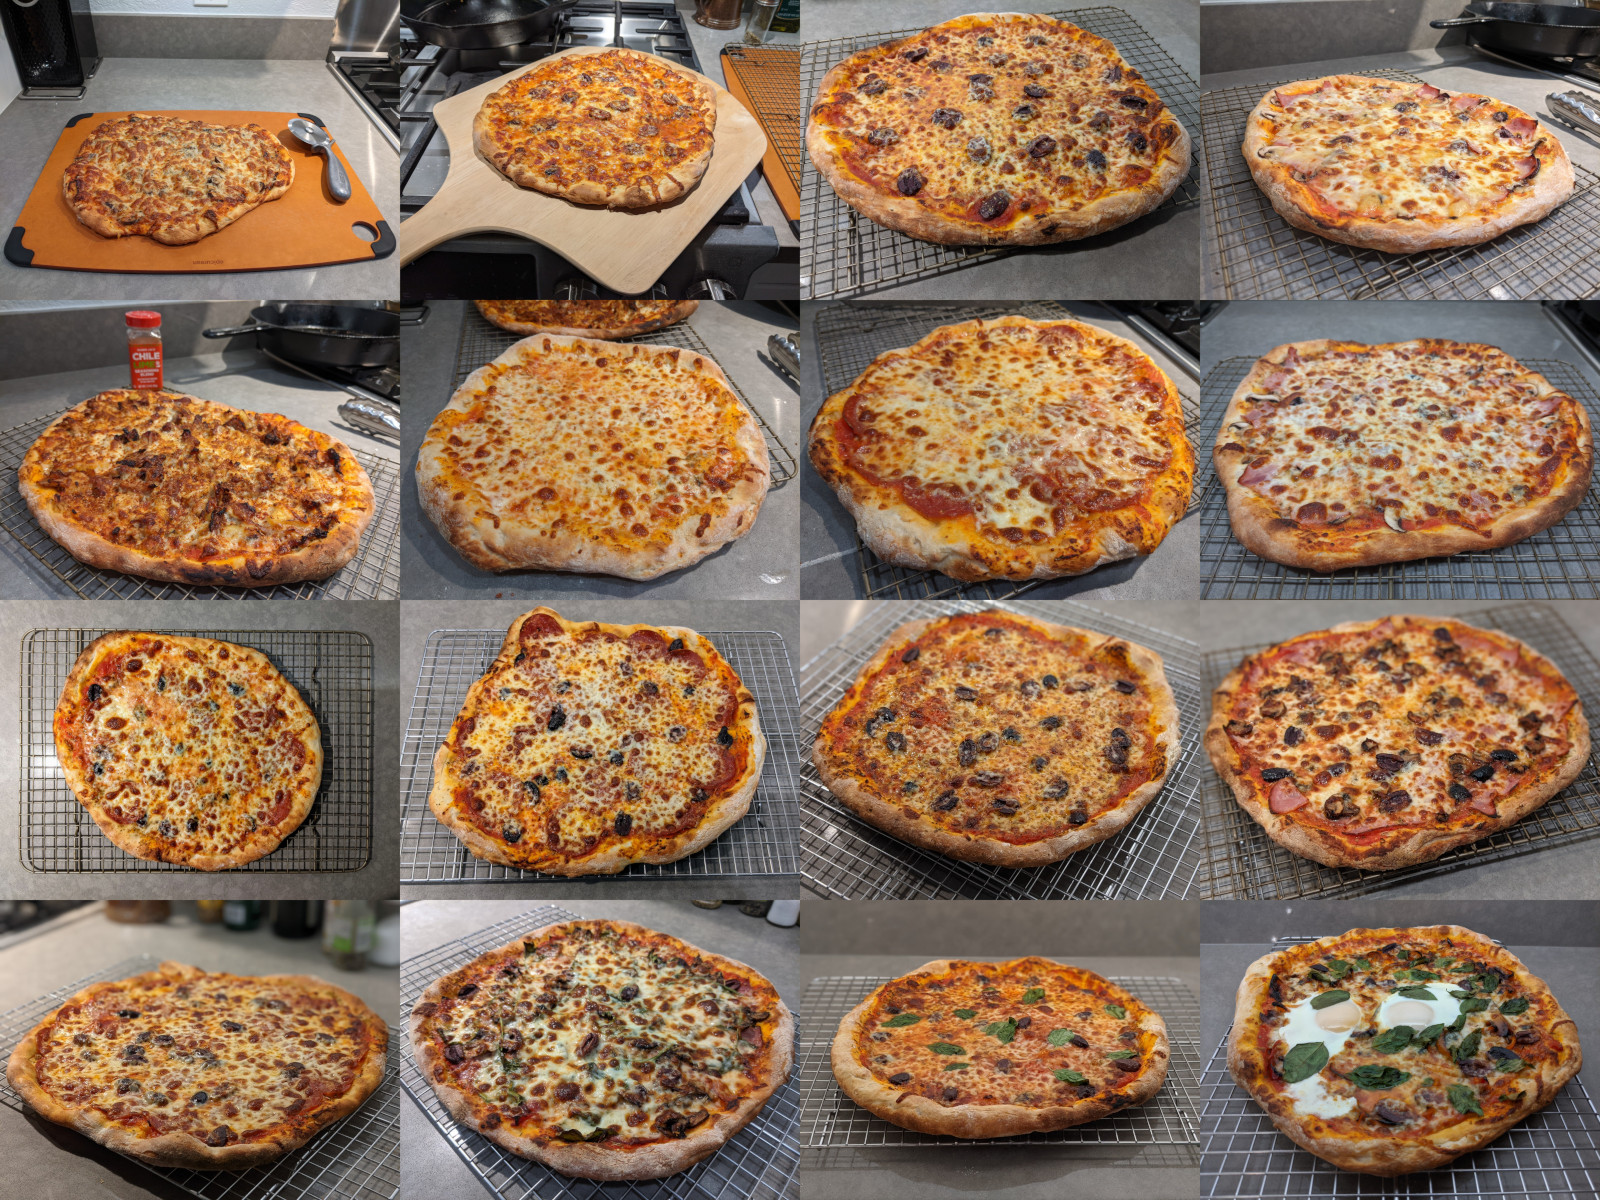 Collage of 16 pizzas made between January and May 2021